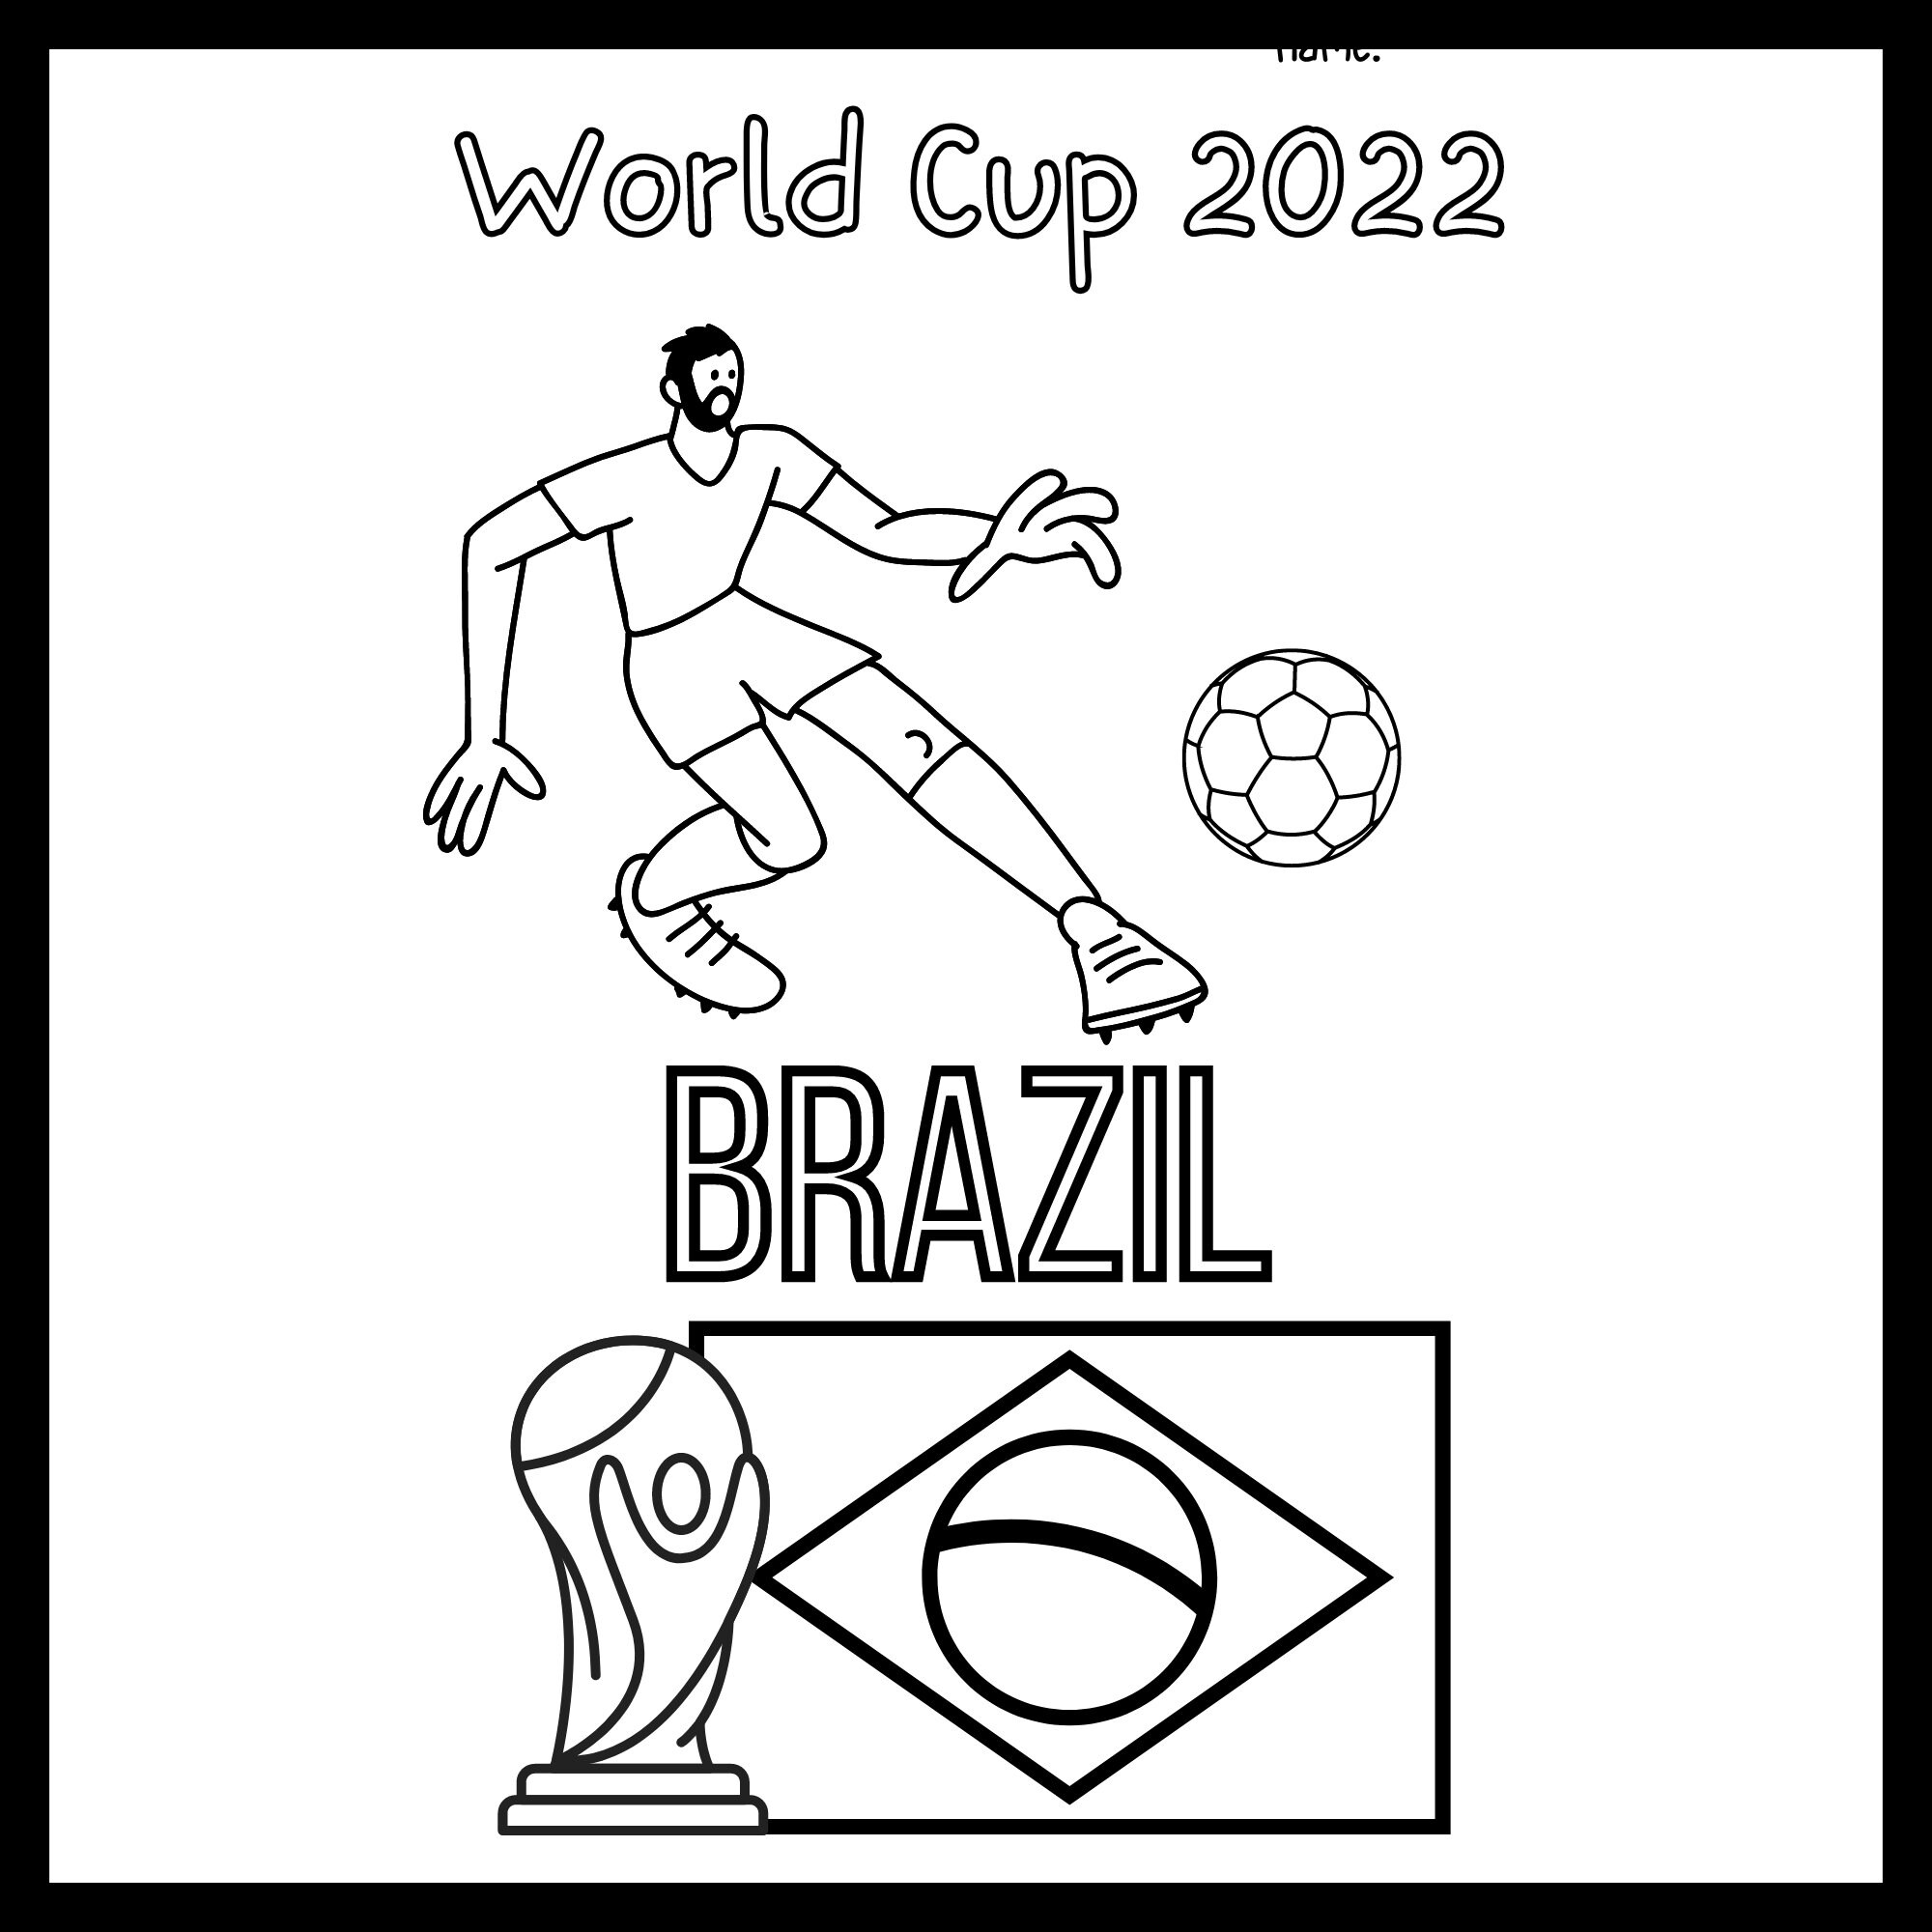 FIFA World Cup Coloring Pages/world Cup 2022 Coloring Book - Etsy